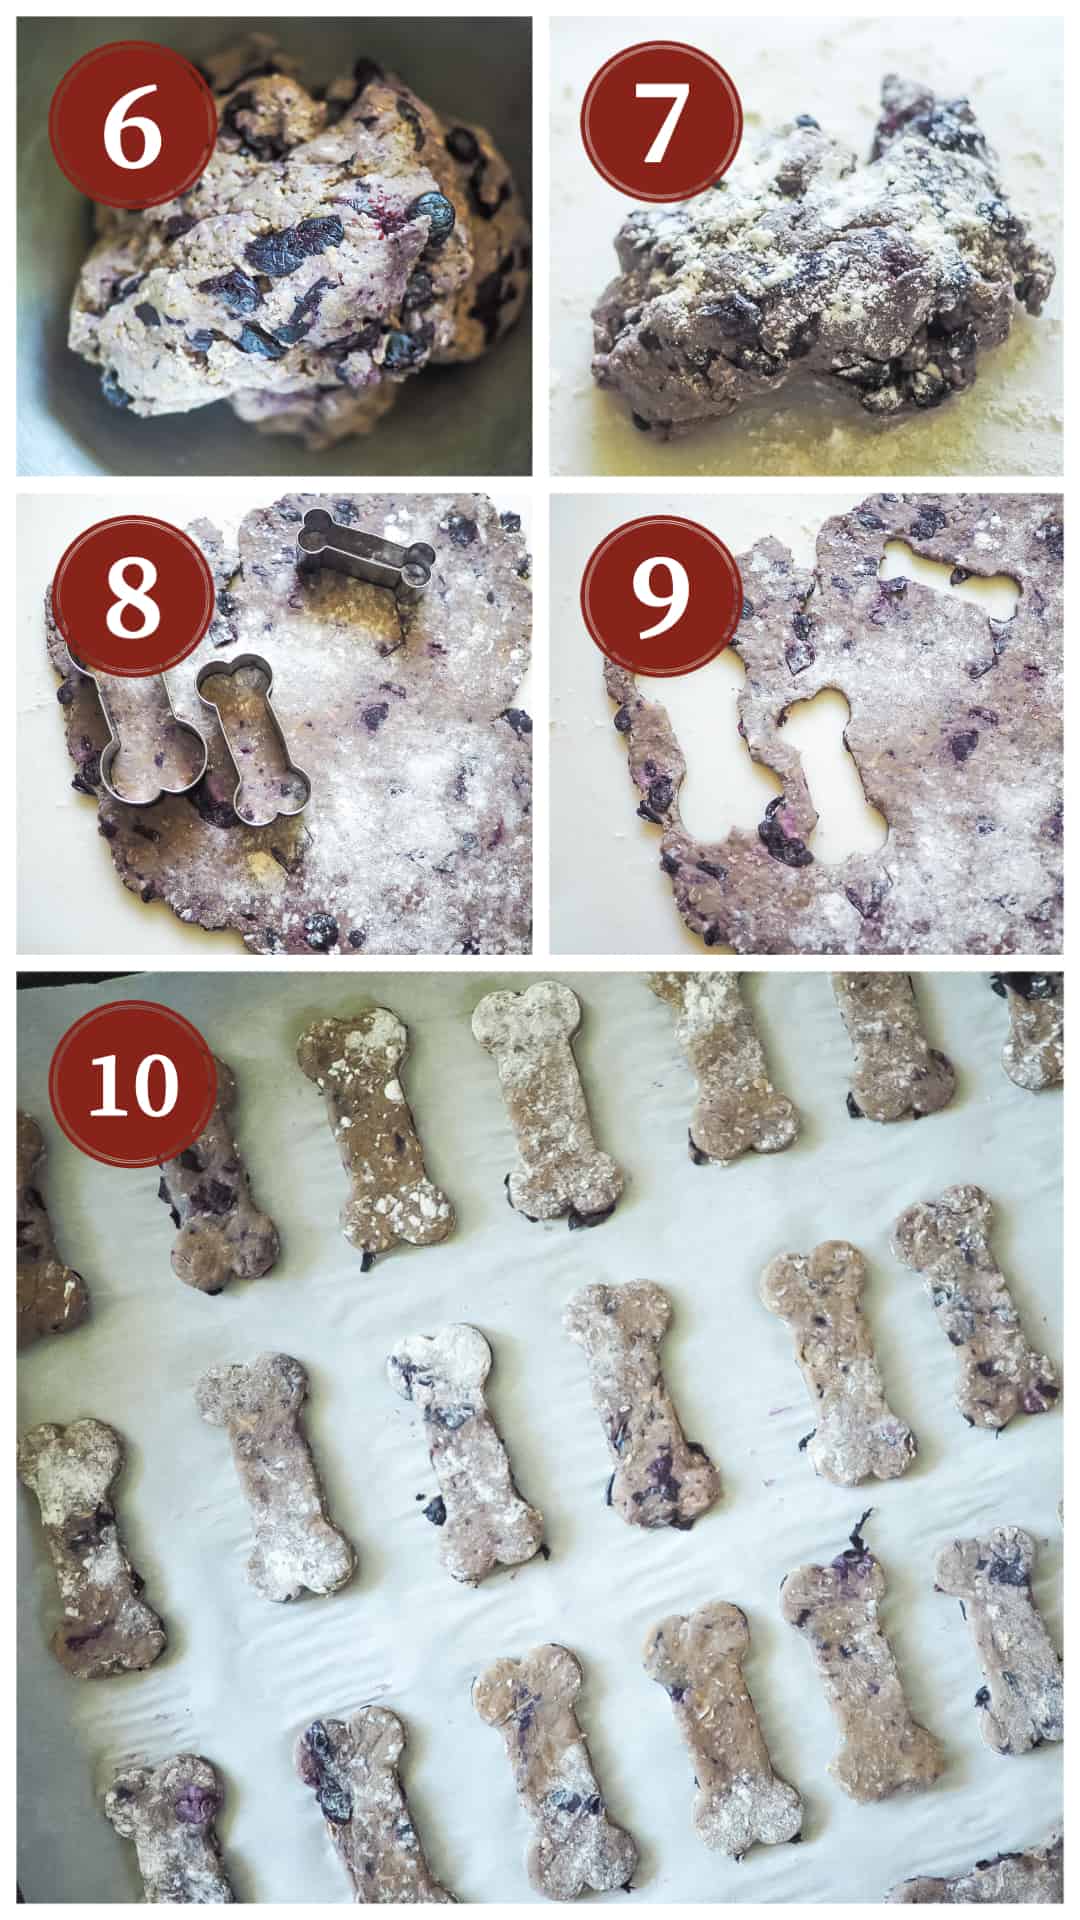 A collage of images showing the process of making blueberry dog treats, steps 6 - 10.